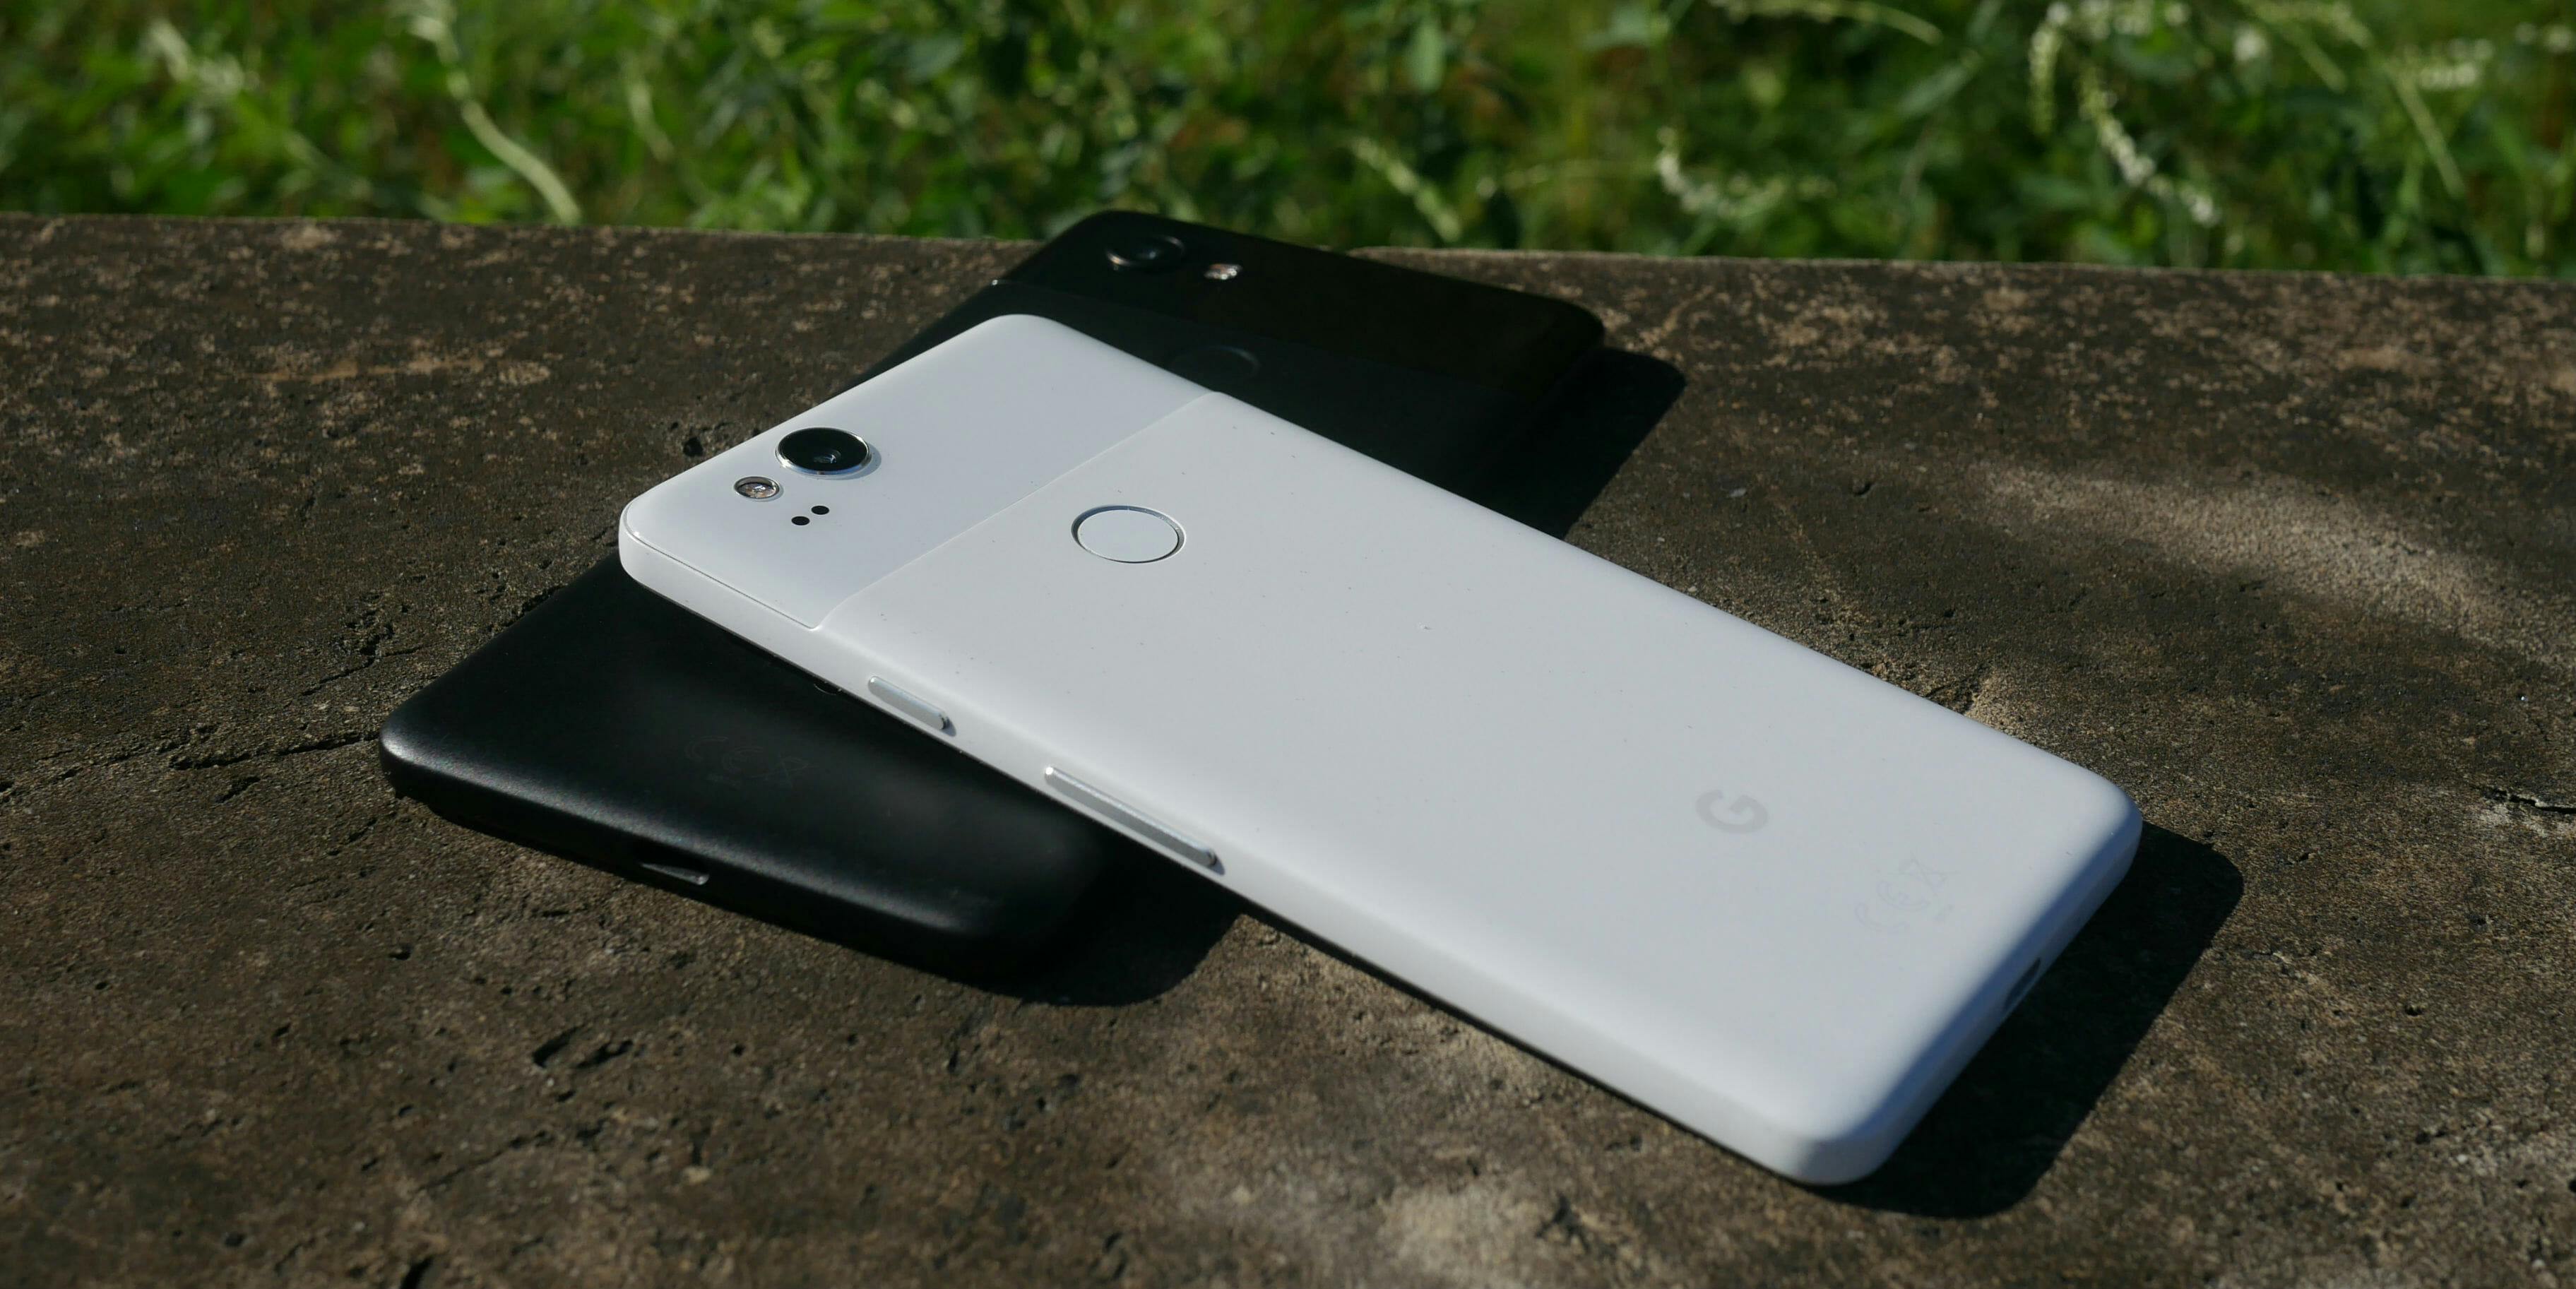 Google Pixel 2 review: Still On Top